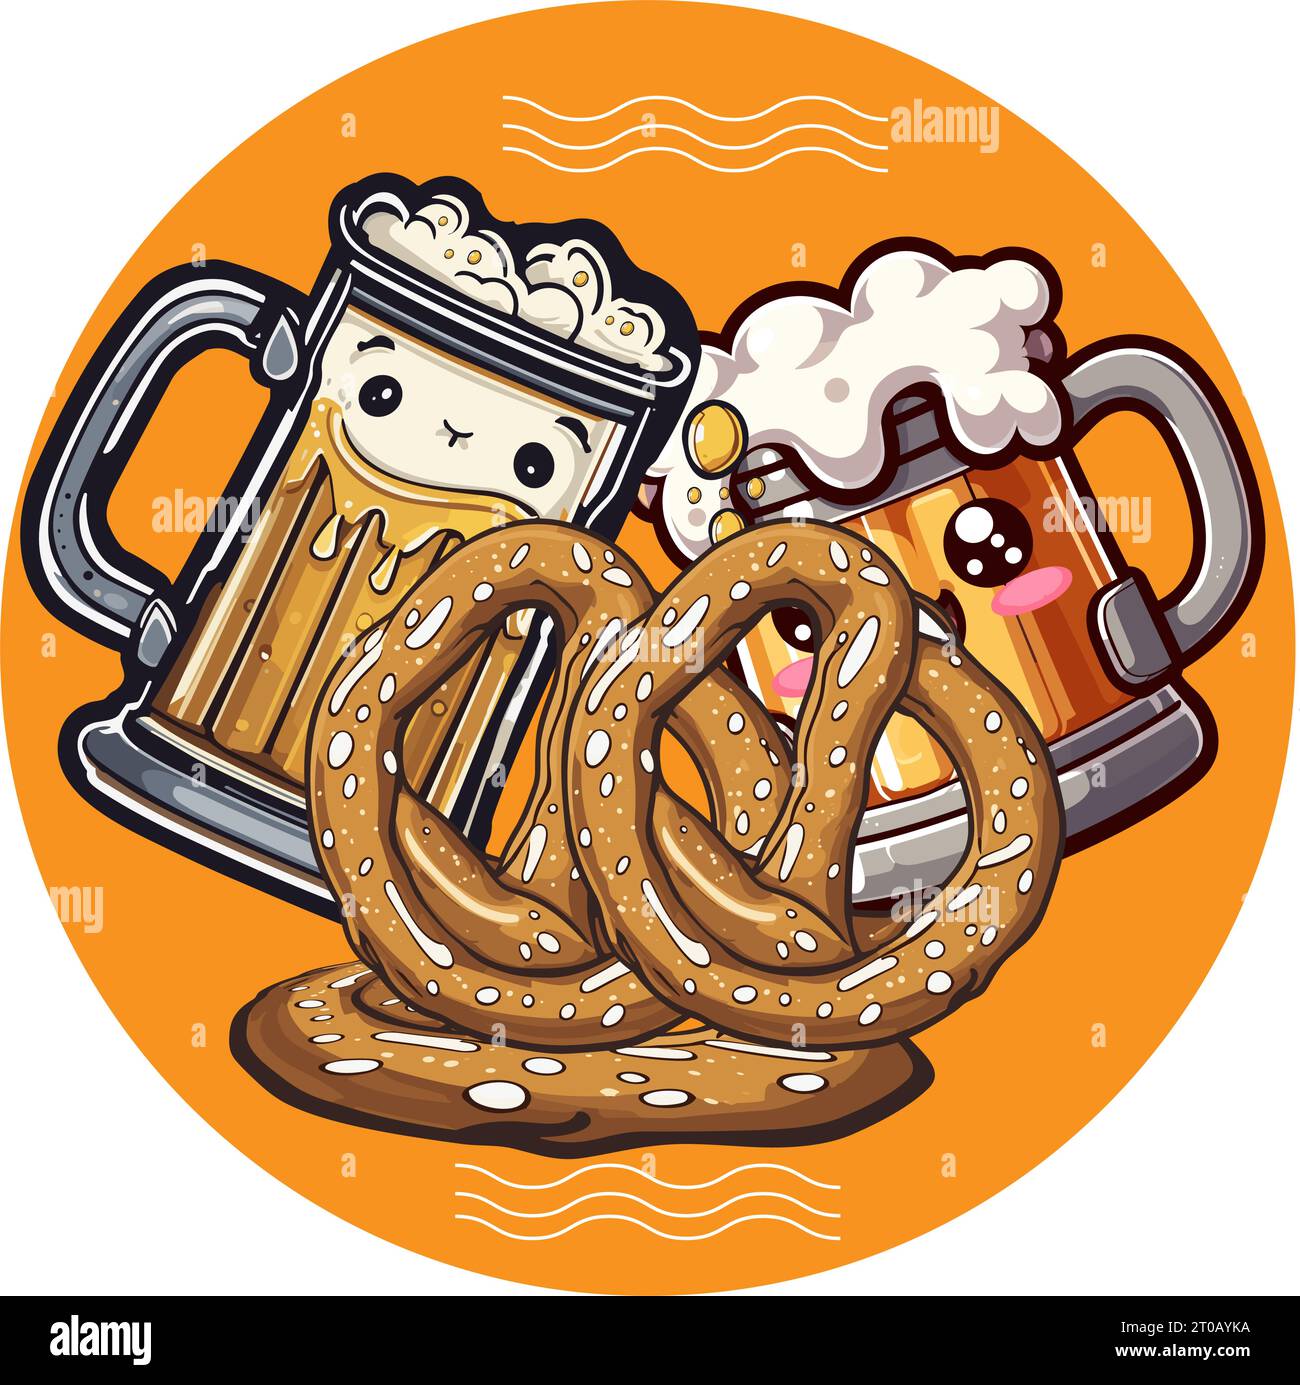 Octoberfest Holiday Background with Pretzel and Beer stein glass. Celebrated German Octoberfest day party Bavaria festival Banner. Beer mug, Giant pre Stock Vector